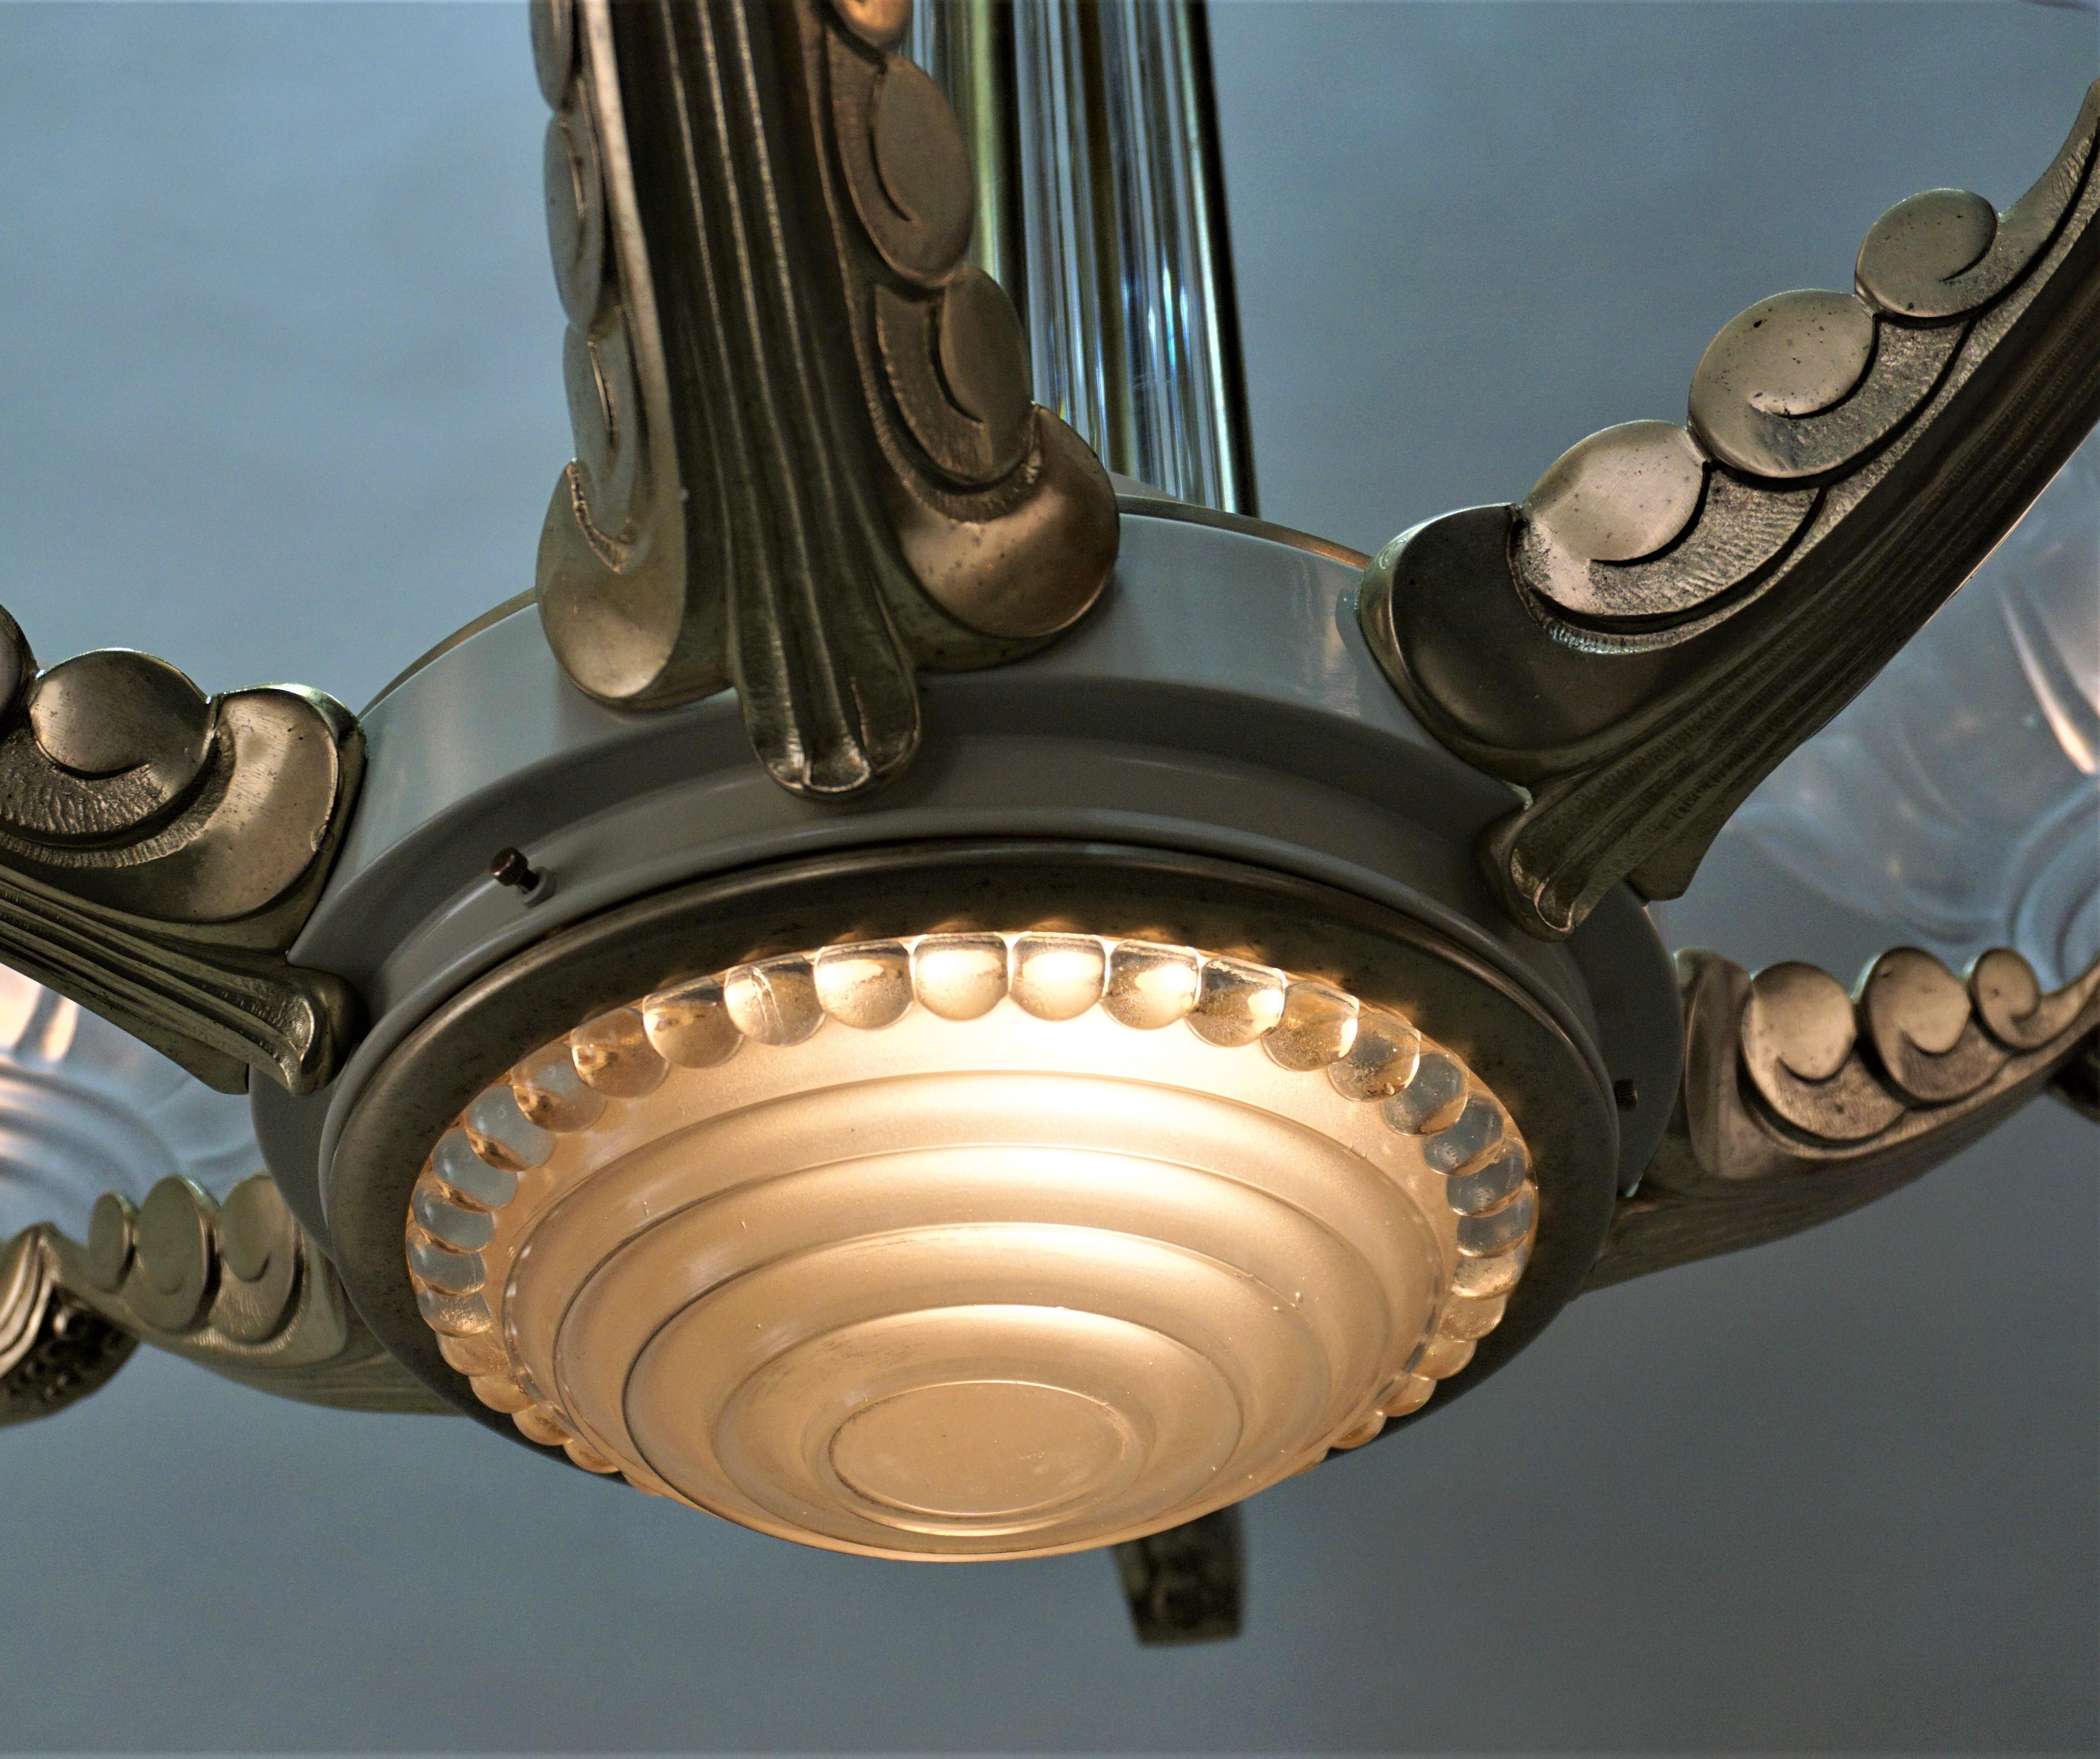 French Art Deco chandelier by Petitot. It features a bronze and lacquer on bronze frame with glass rods as a center column and molded glass shades.
Height is 42